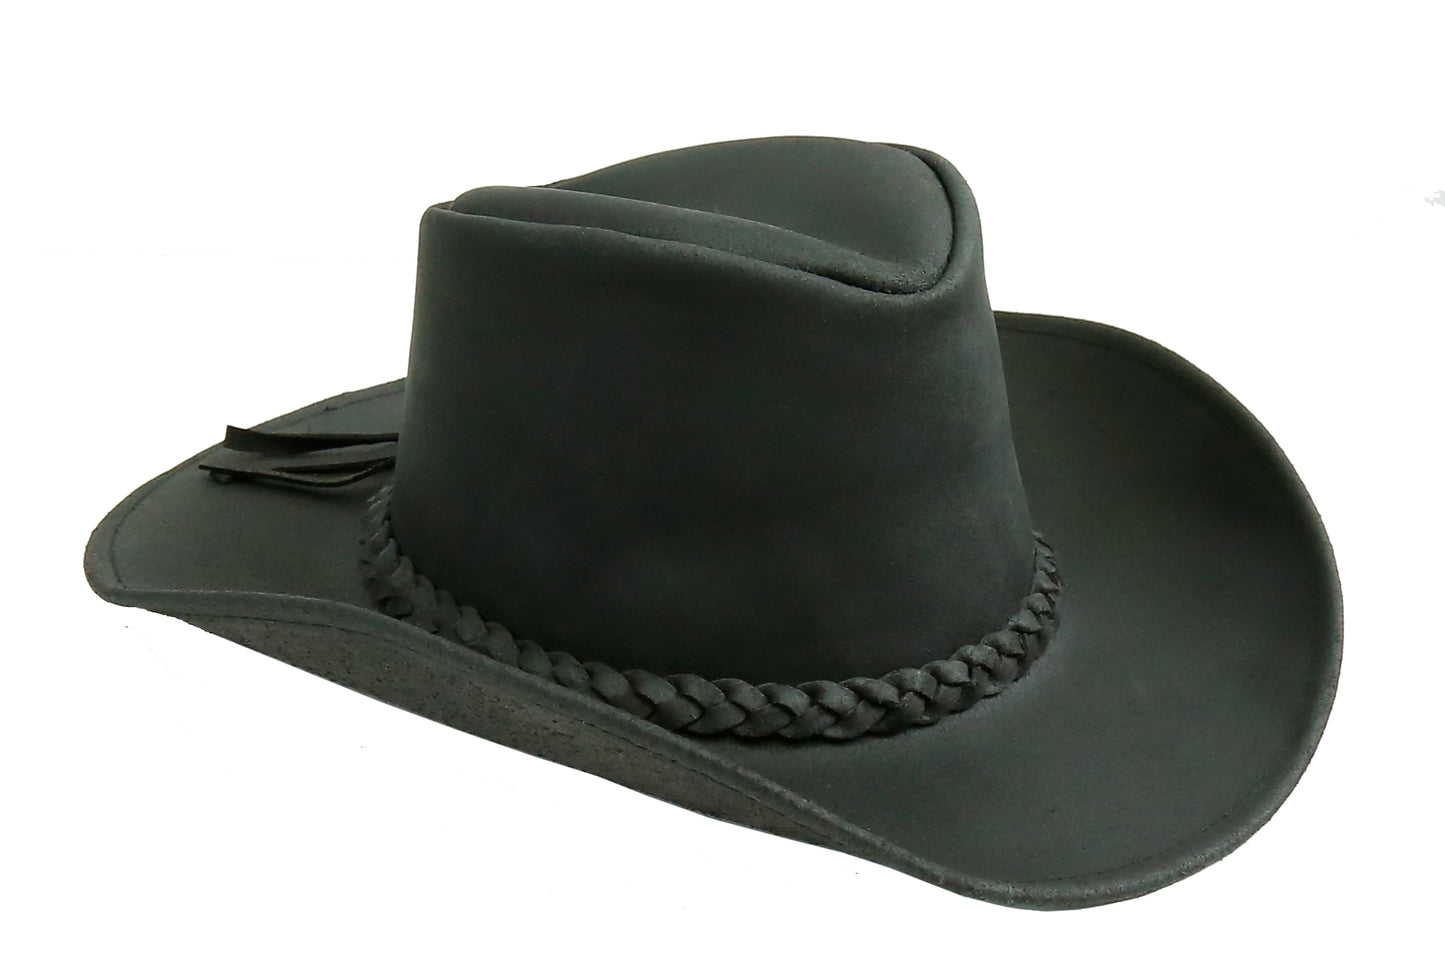 Cowboy leather hat for women and men with formable brim in black and brown